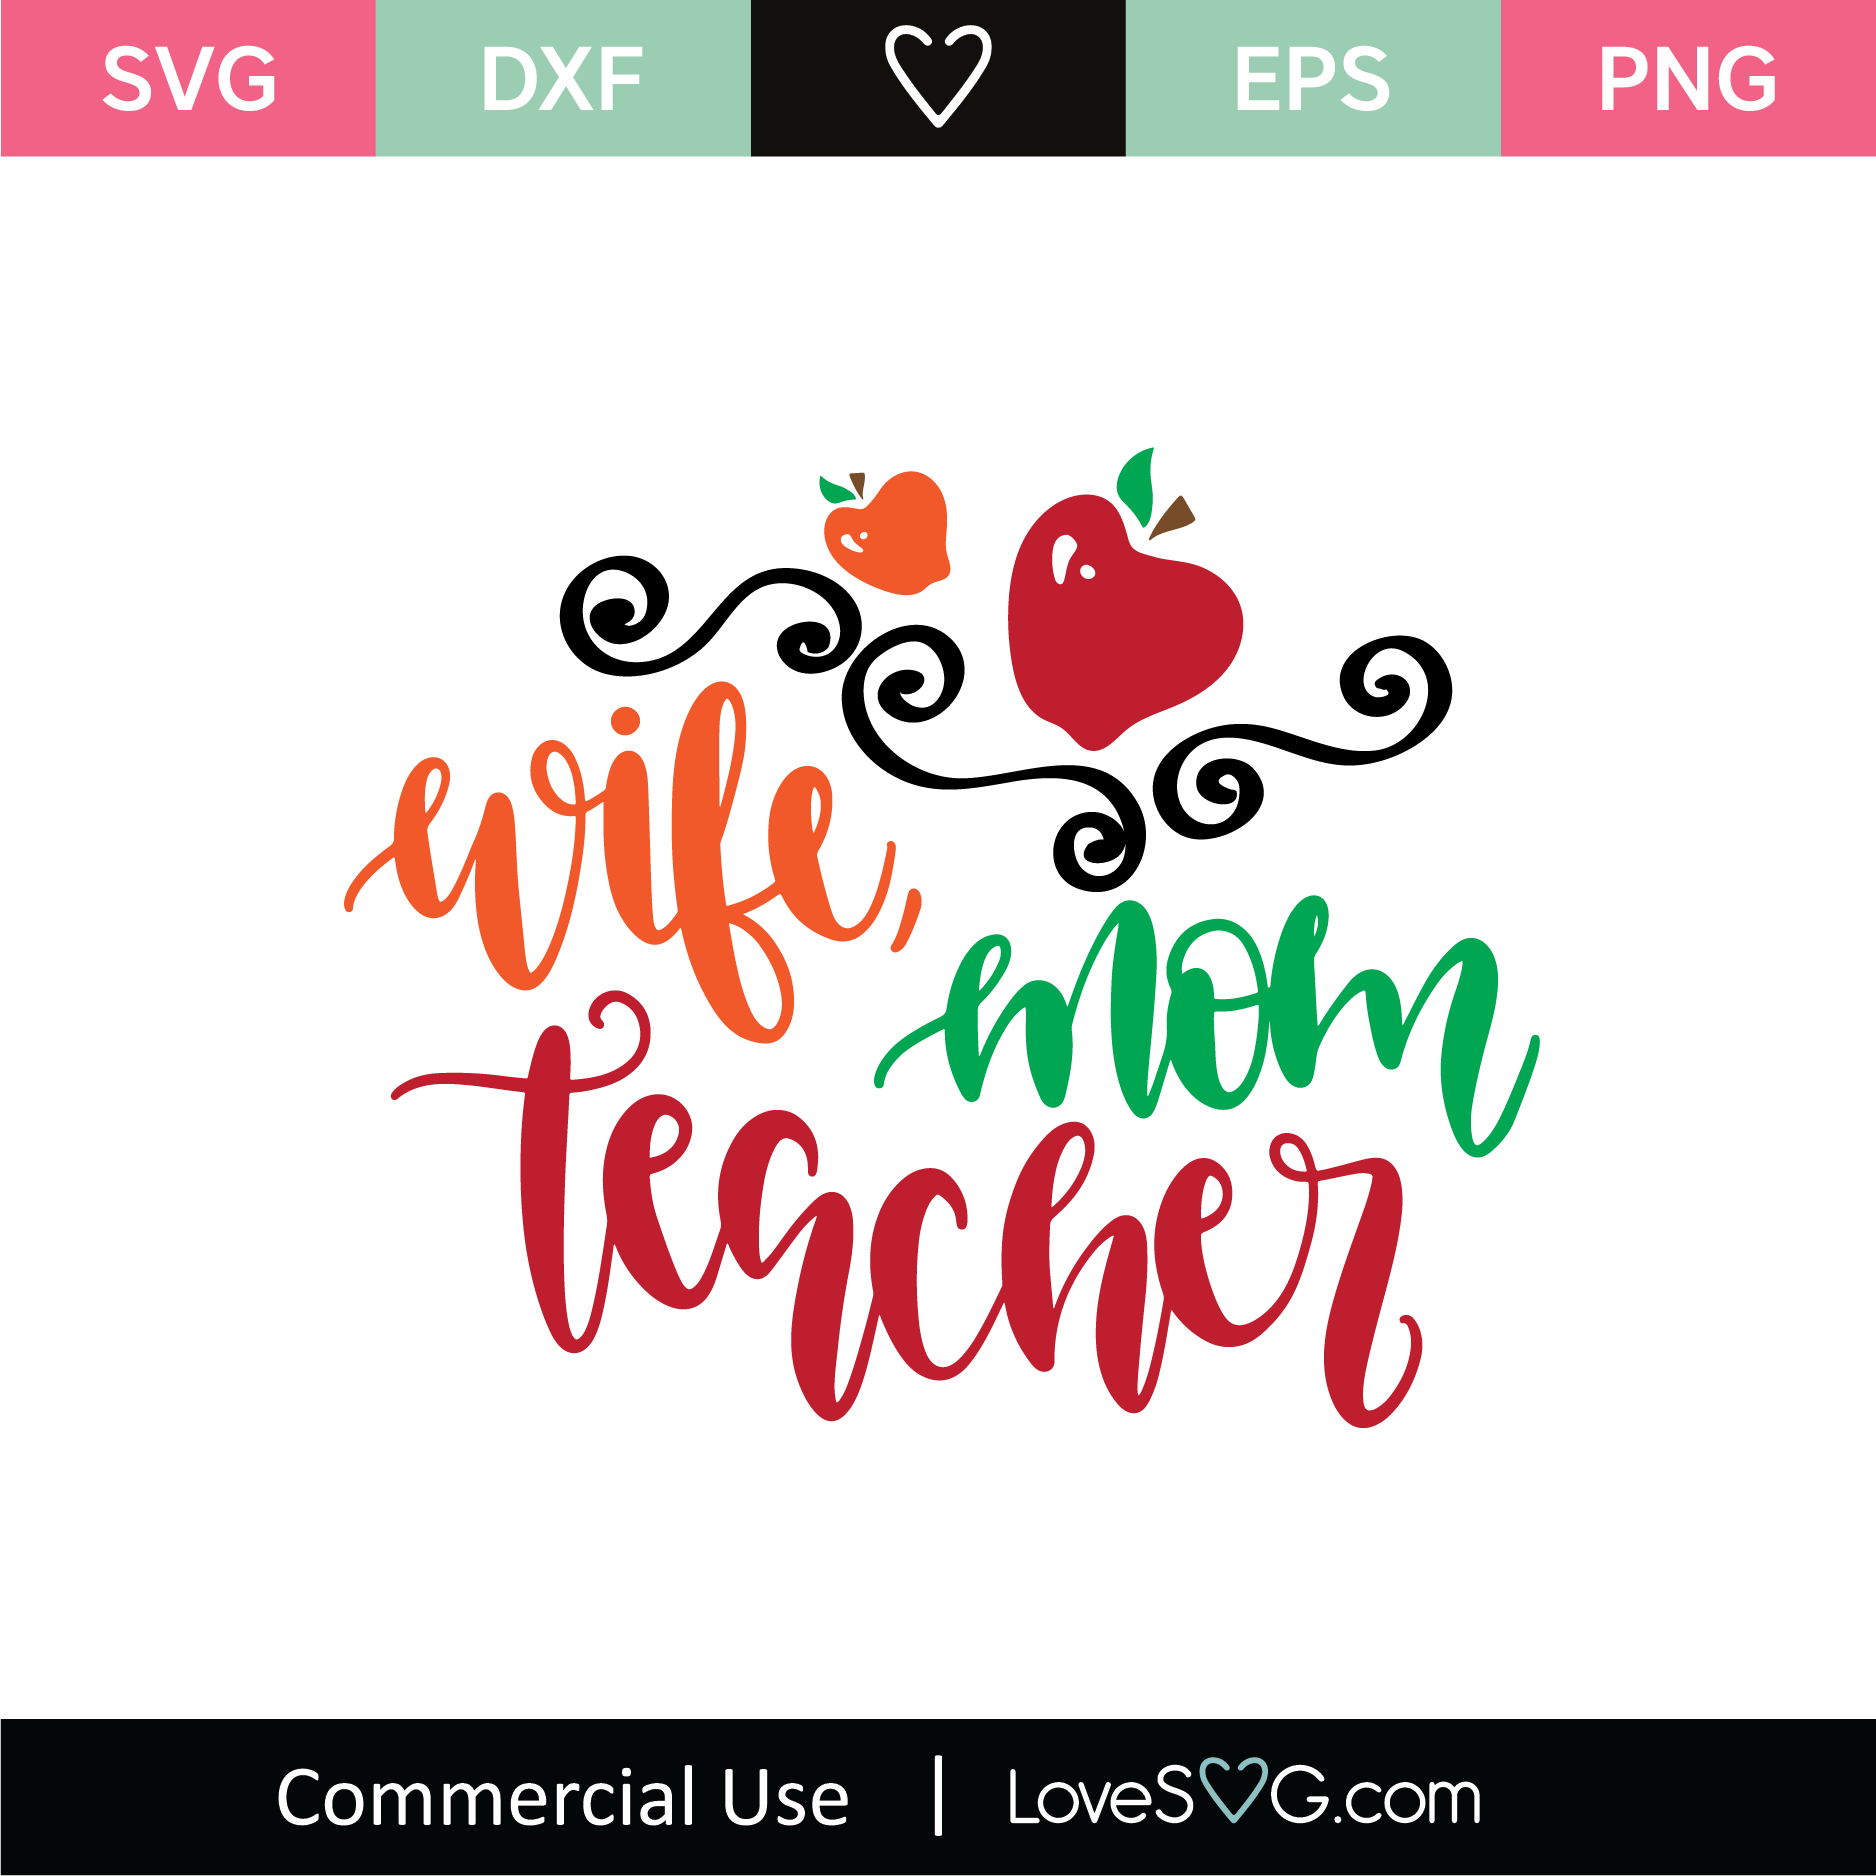 Download Teacher Love Svg Teachers Pay Teachers Is A Site For Teachers To Sell Their Designs To Other Teachers PSD Mockup Templates